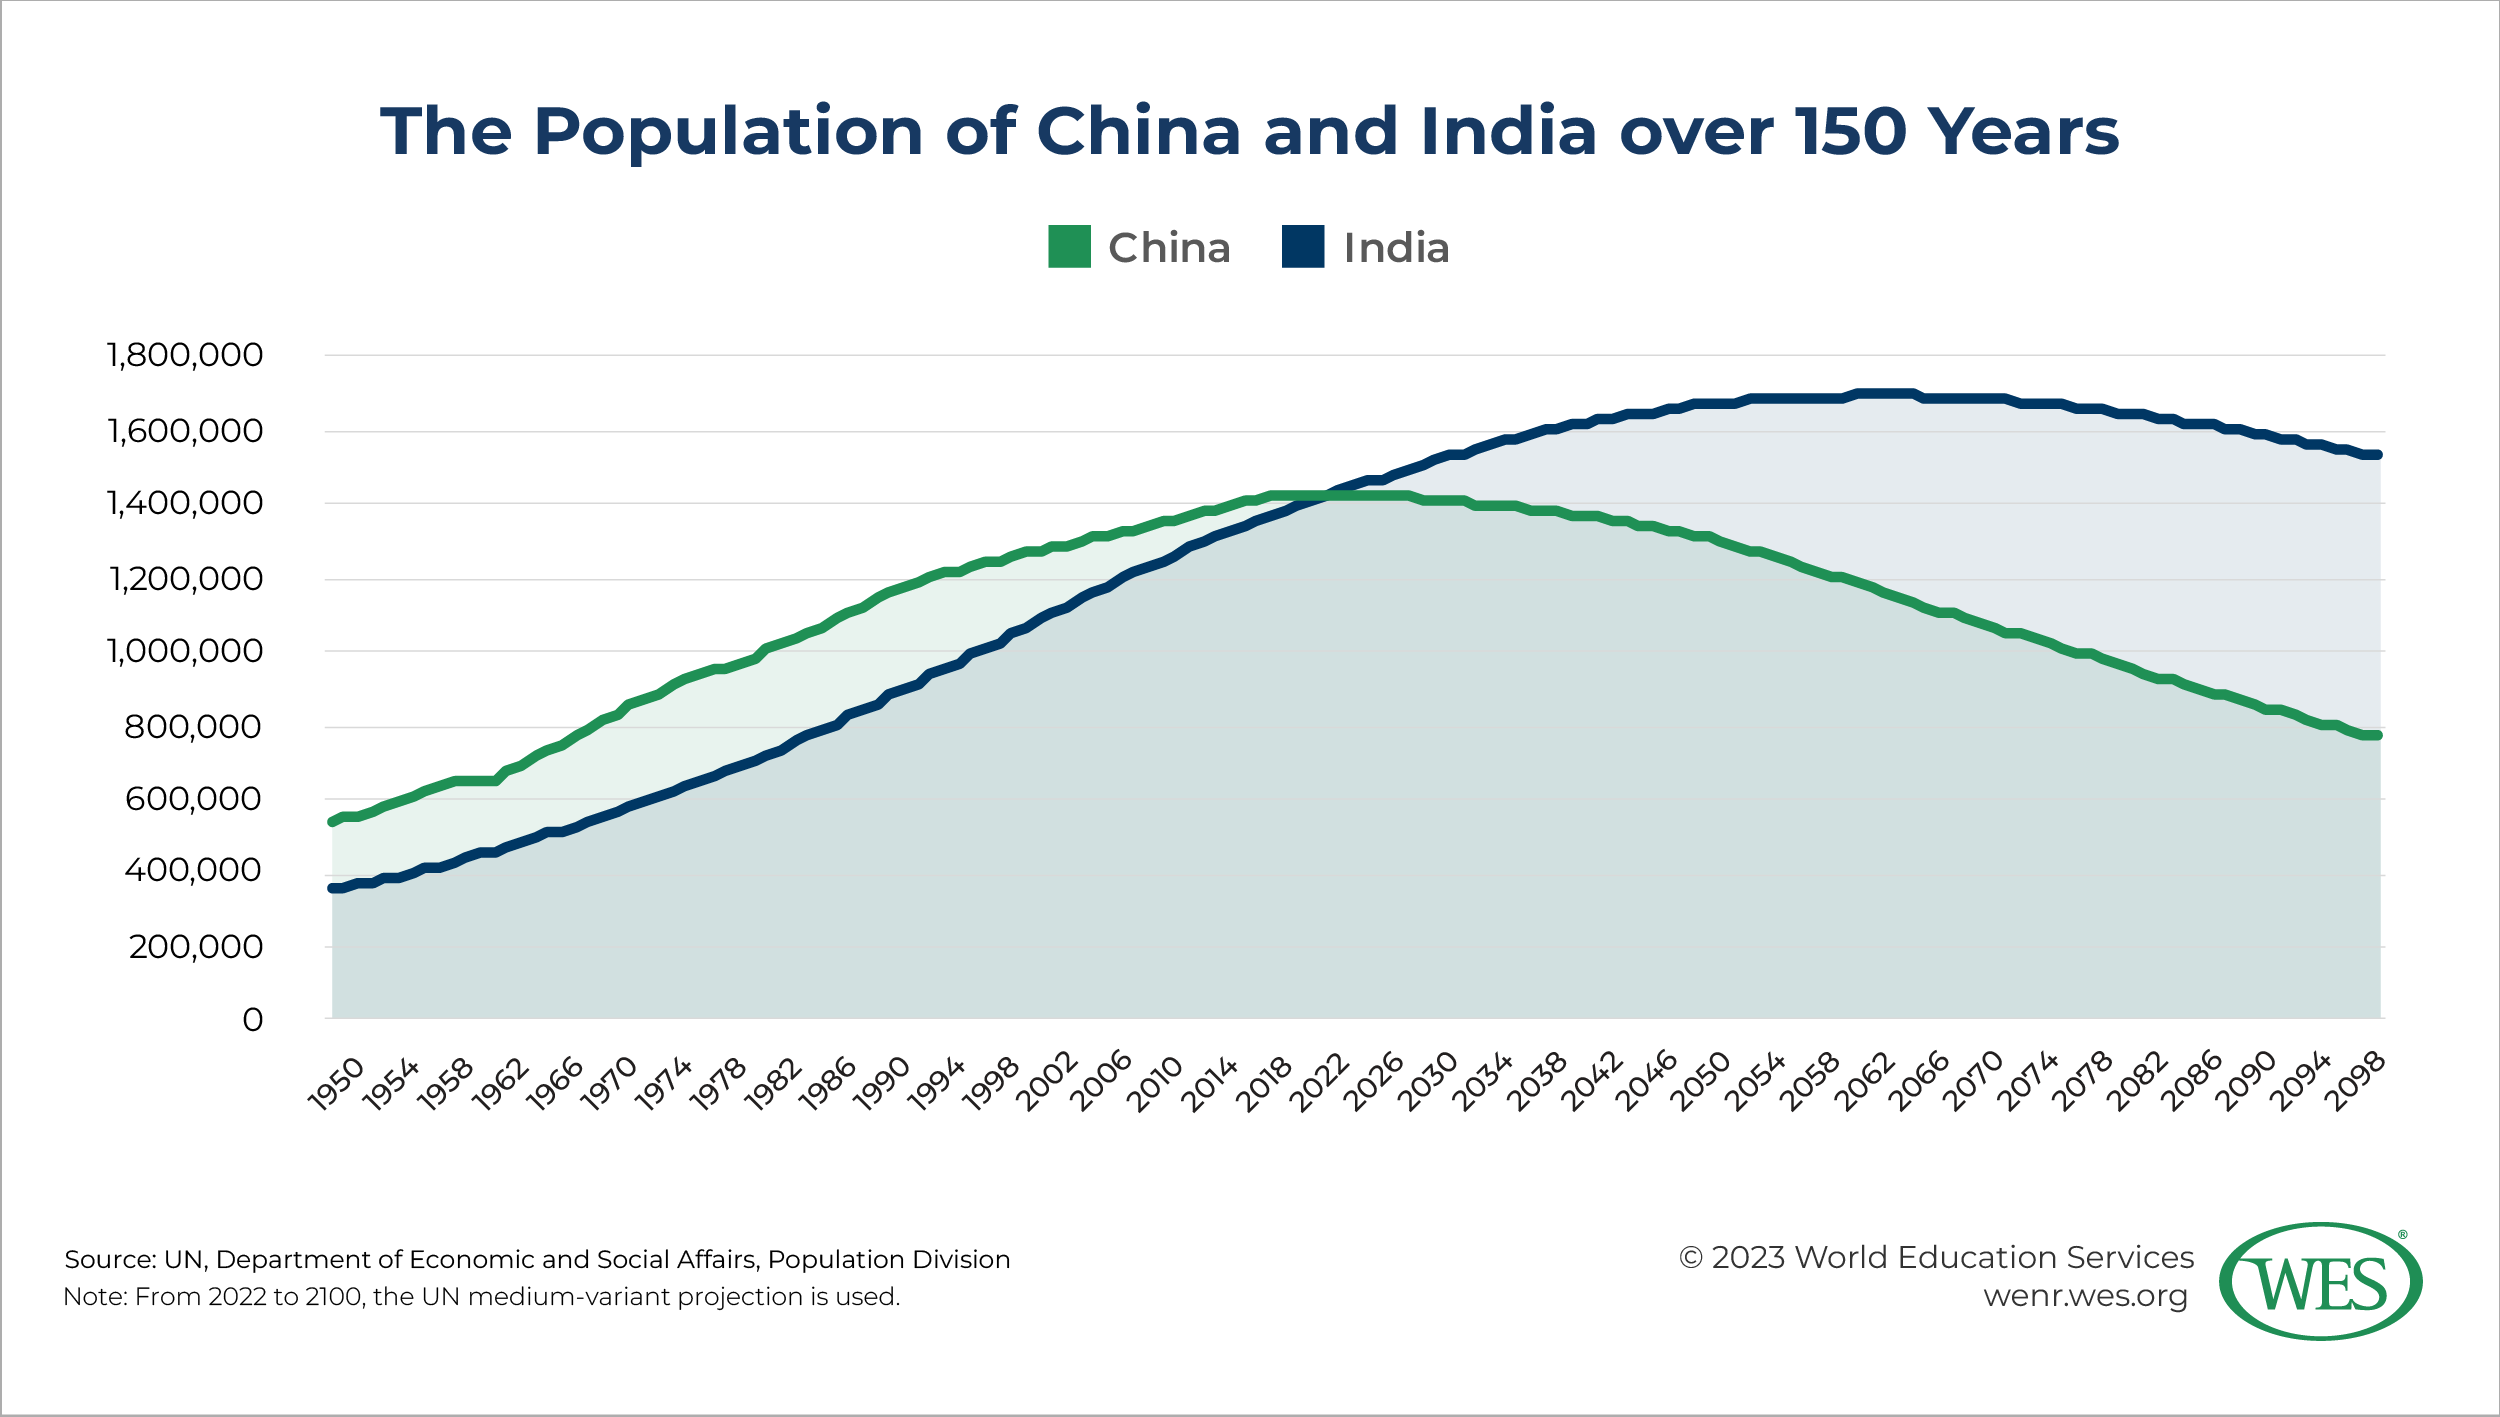 A chart showing the population of China and India between 1950 and 2100. 